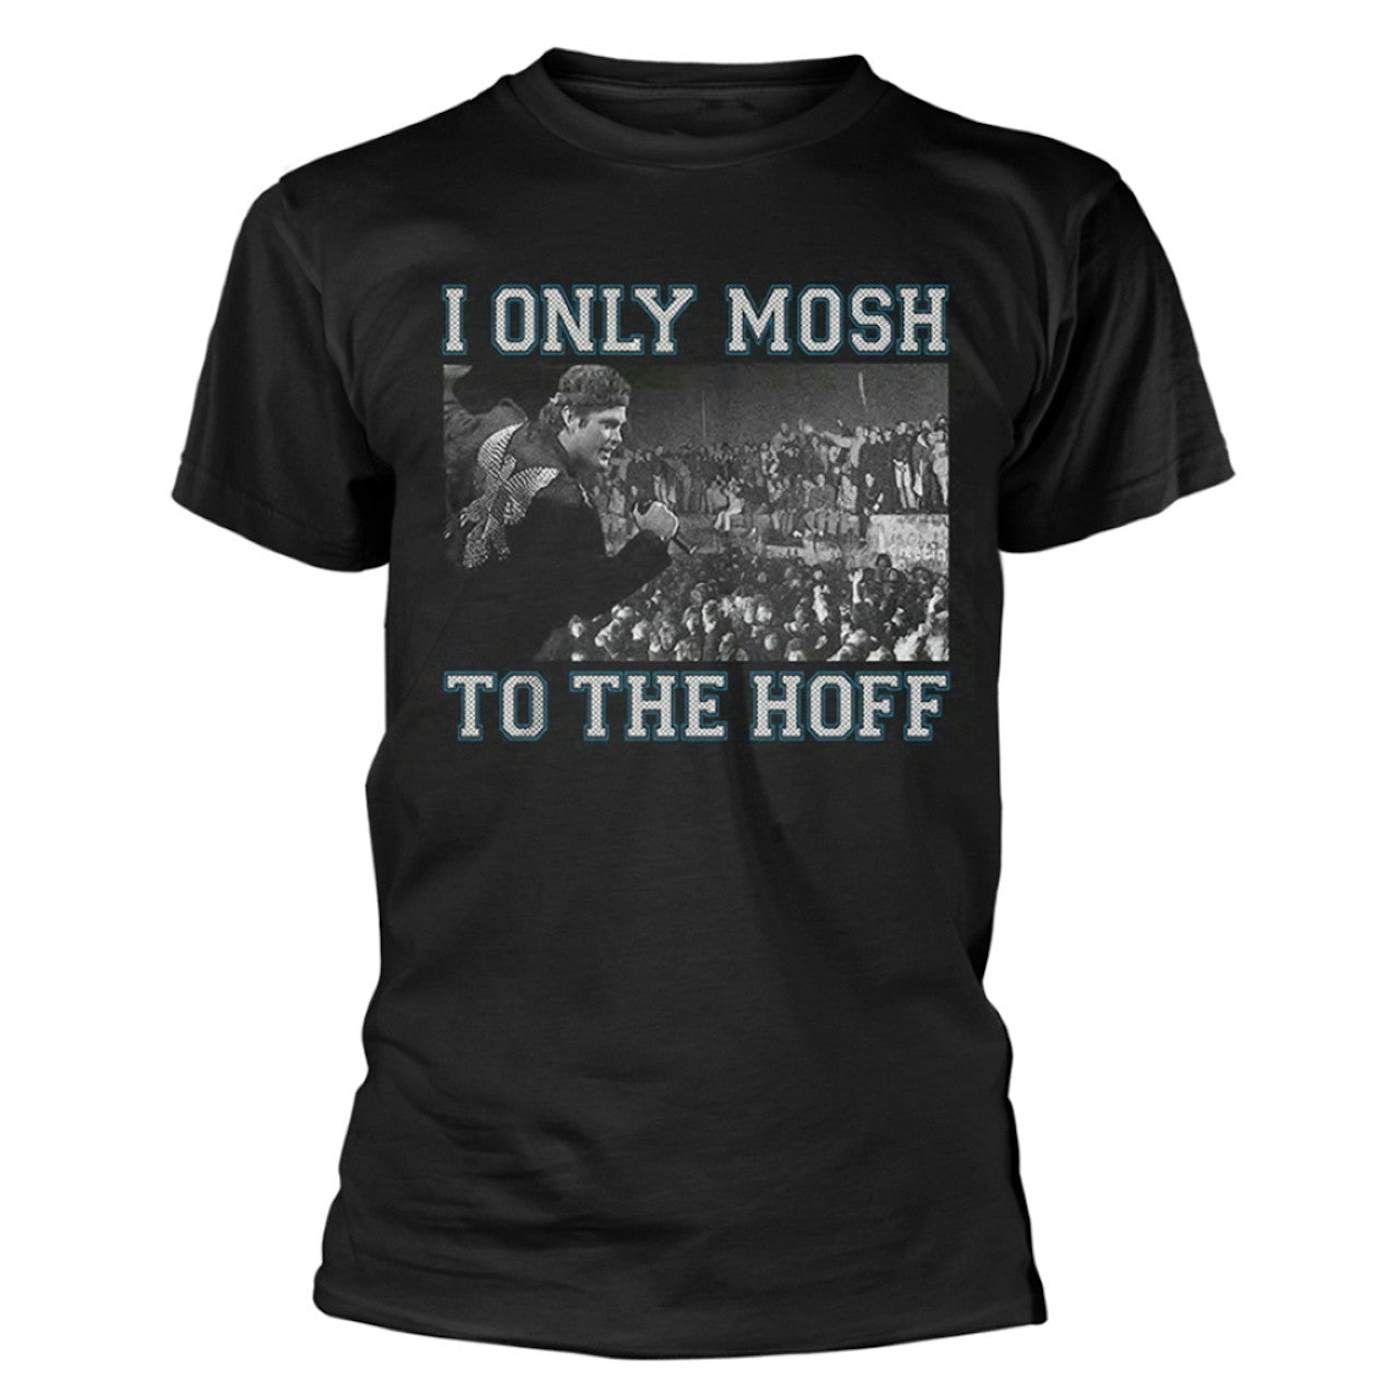 David Hasselhoff T Shirt - I Only Mosh To The Hoff